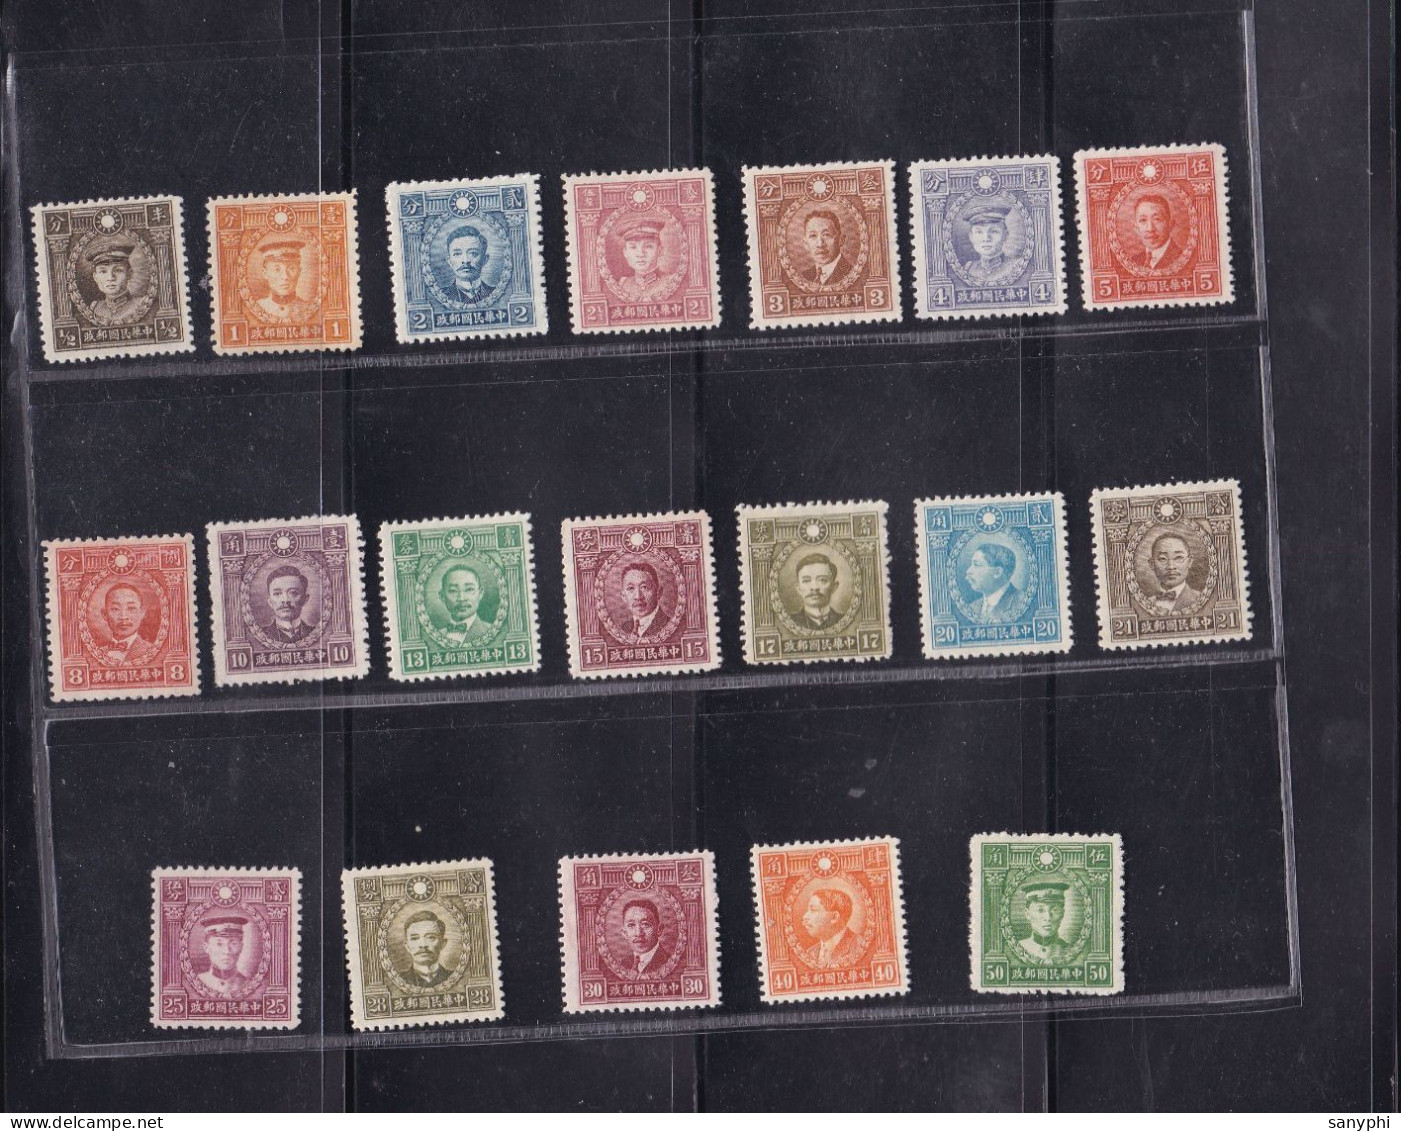 China Chine 1940 Martyrs Issue Hong Kong Print Unwmkd Complete Set, 19 Stamps - 1912-1949 Republic